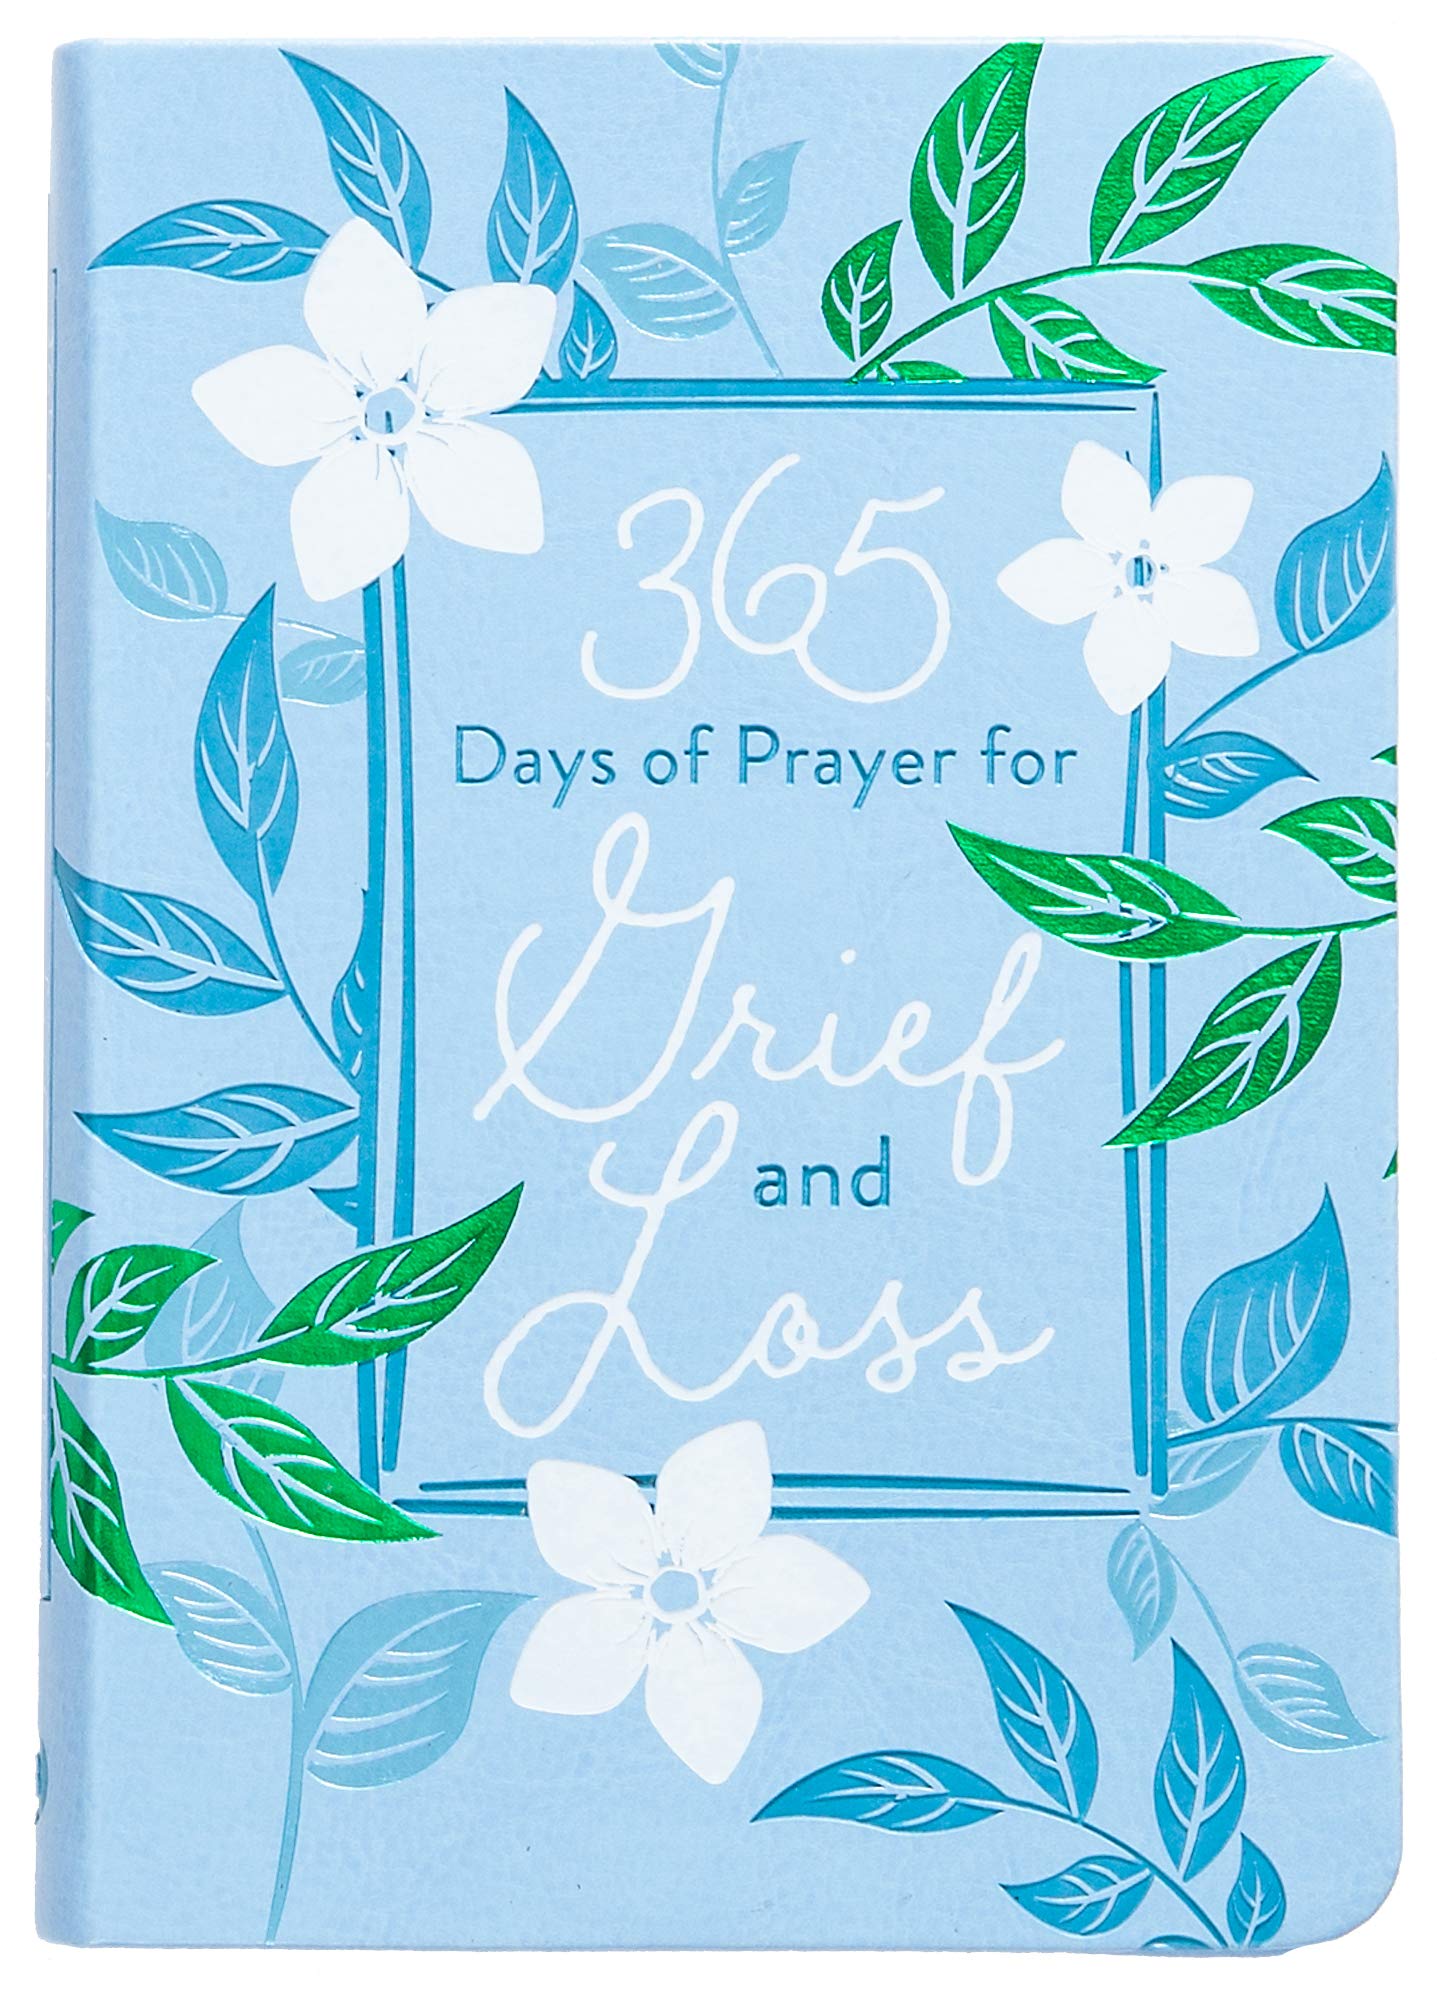 ROCKONLINE | 365 Days of Prayer for Grief and Loss Devotional | Faux Leather | New Creation Church | NCC | Joseph Prince | ROCK Bookshop | ROCK Bookstore | Star Vista | Christian Living | Christian Family | Relationship | Love and Loss | Free delivery for Singapore Orders above $50.